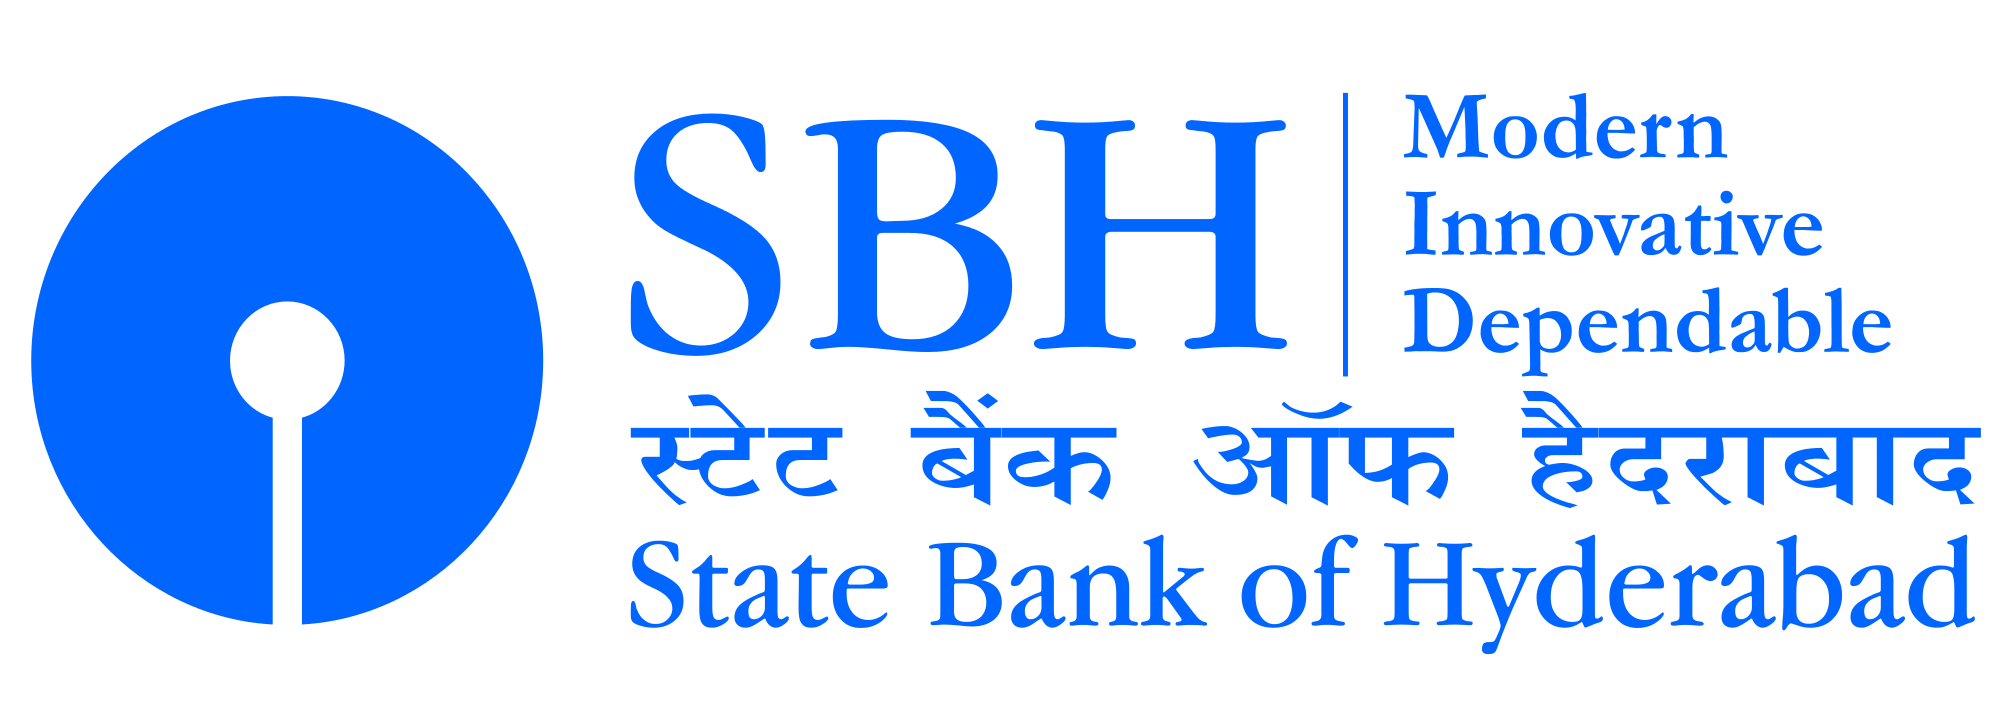 State_Bank_of_Hyderabad_phone number